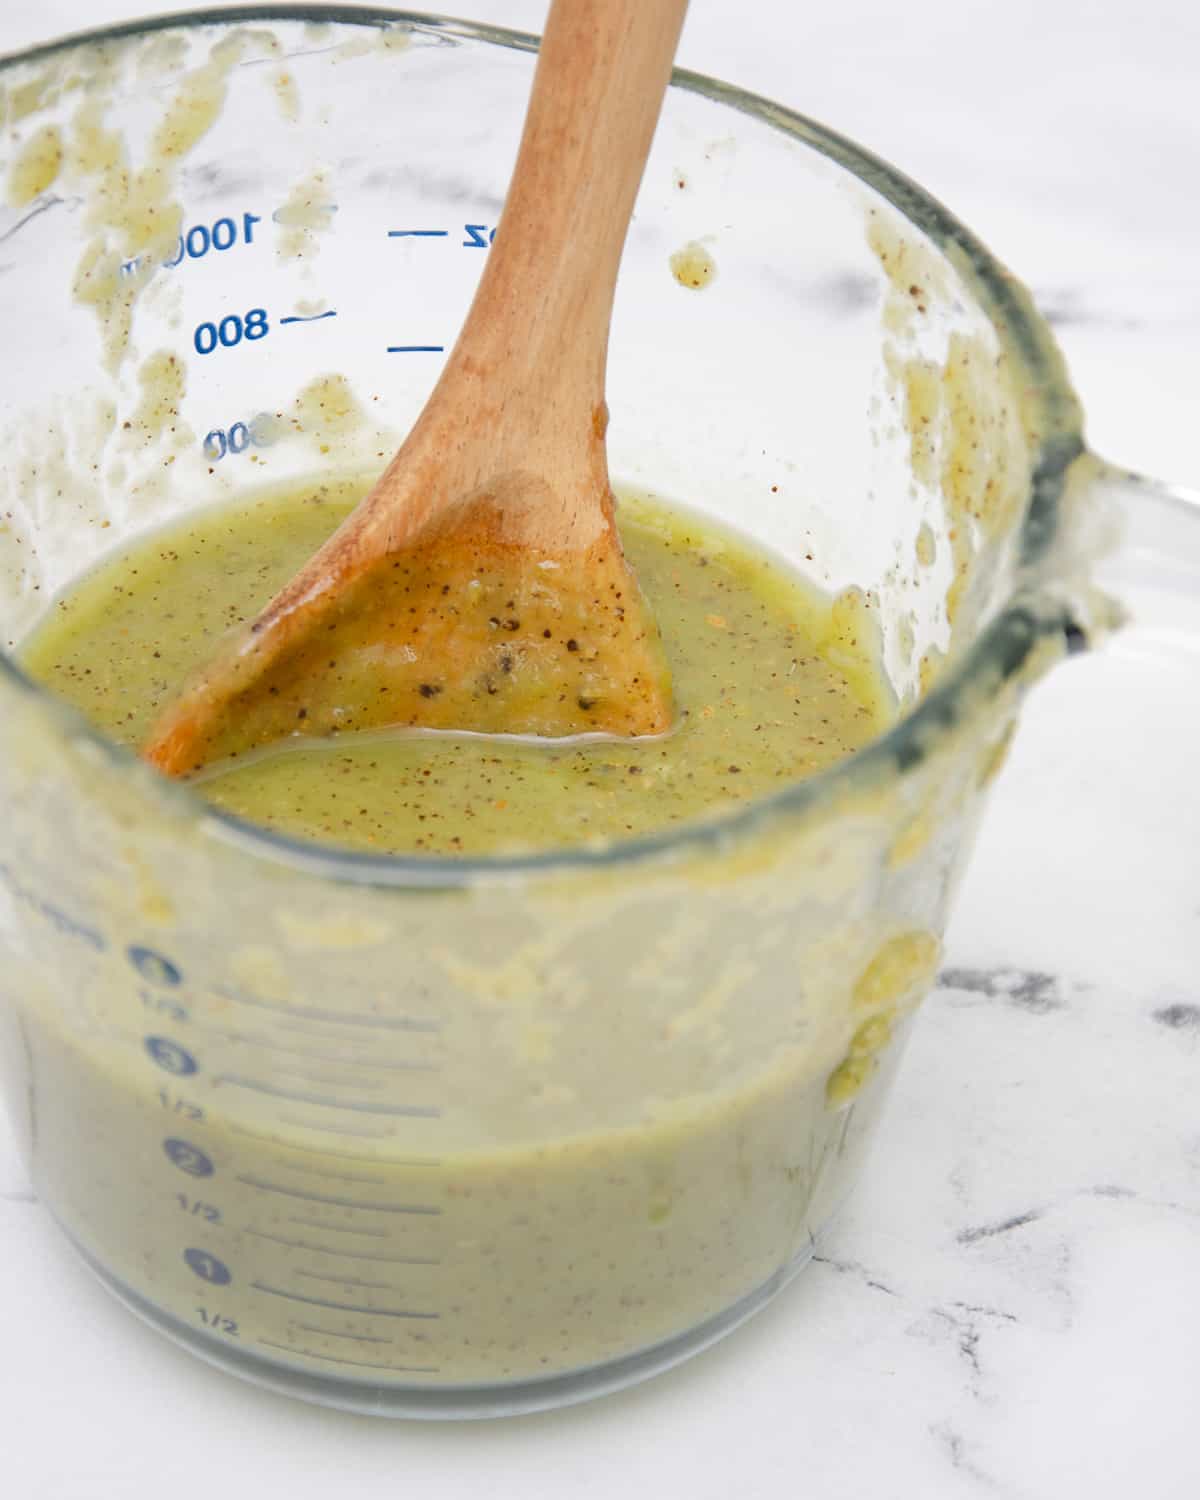 Glass measuring cup with strained kiwi puree.